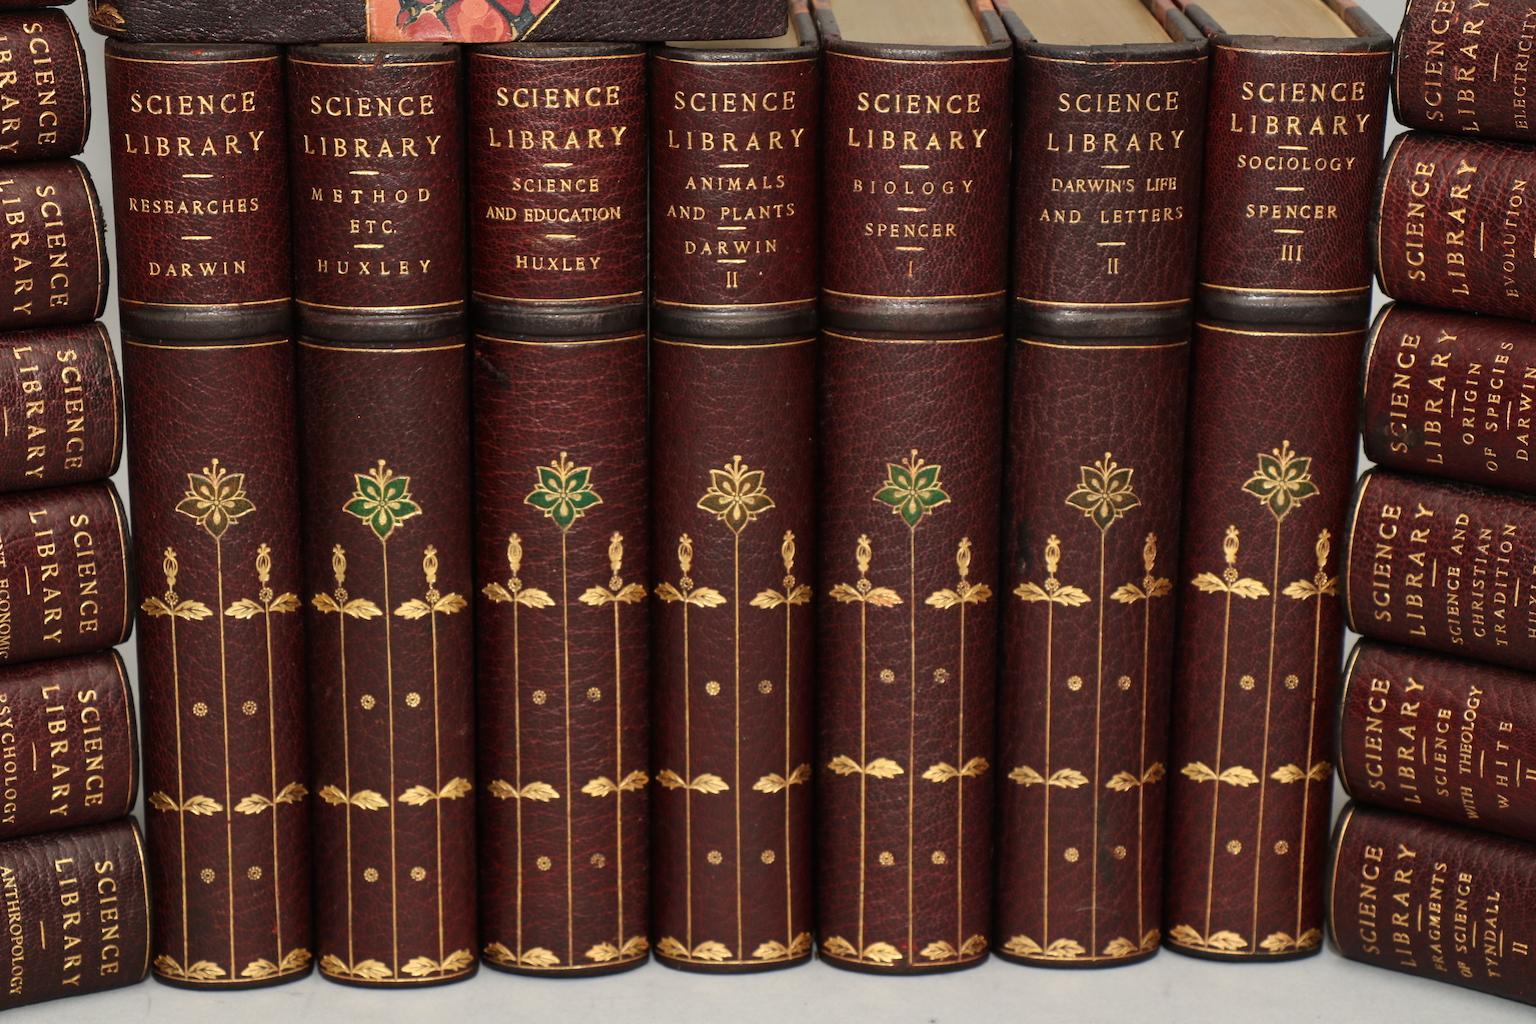 Westminster Edition (Appleton-Authorized Edition). Leatherbound. Sixty-three volumes. Octavo. Limited to 1000 sets, this is privately bound in exquisite three-quarter maroon leather over marbled boards with finely tooled floral design in gold and